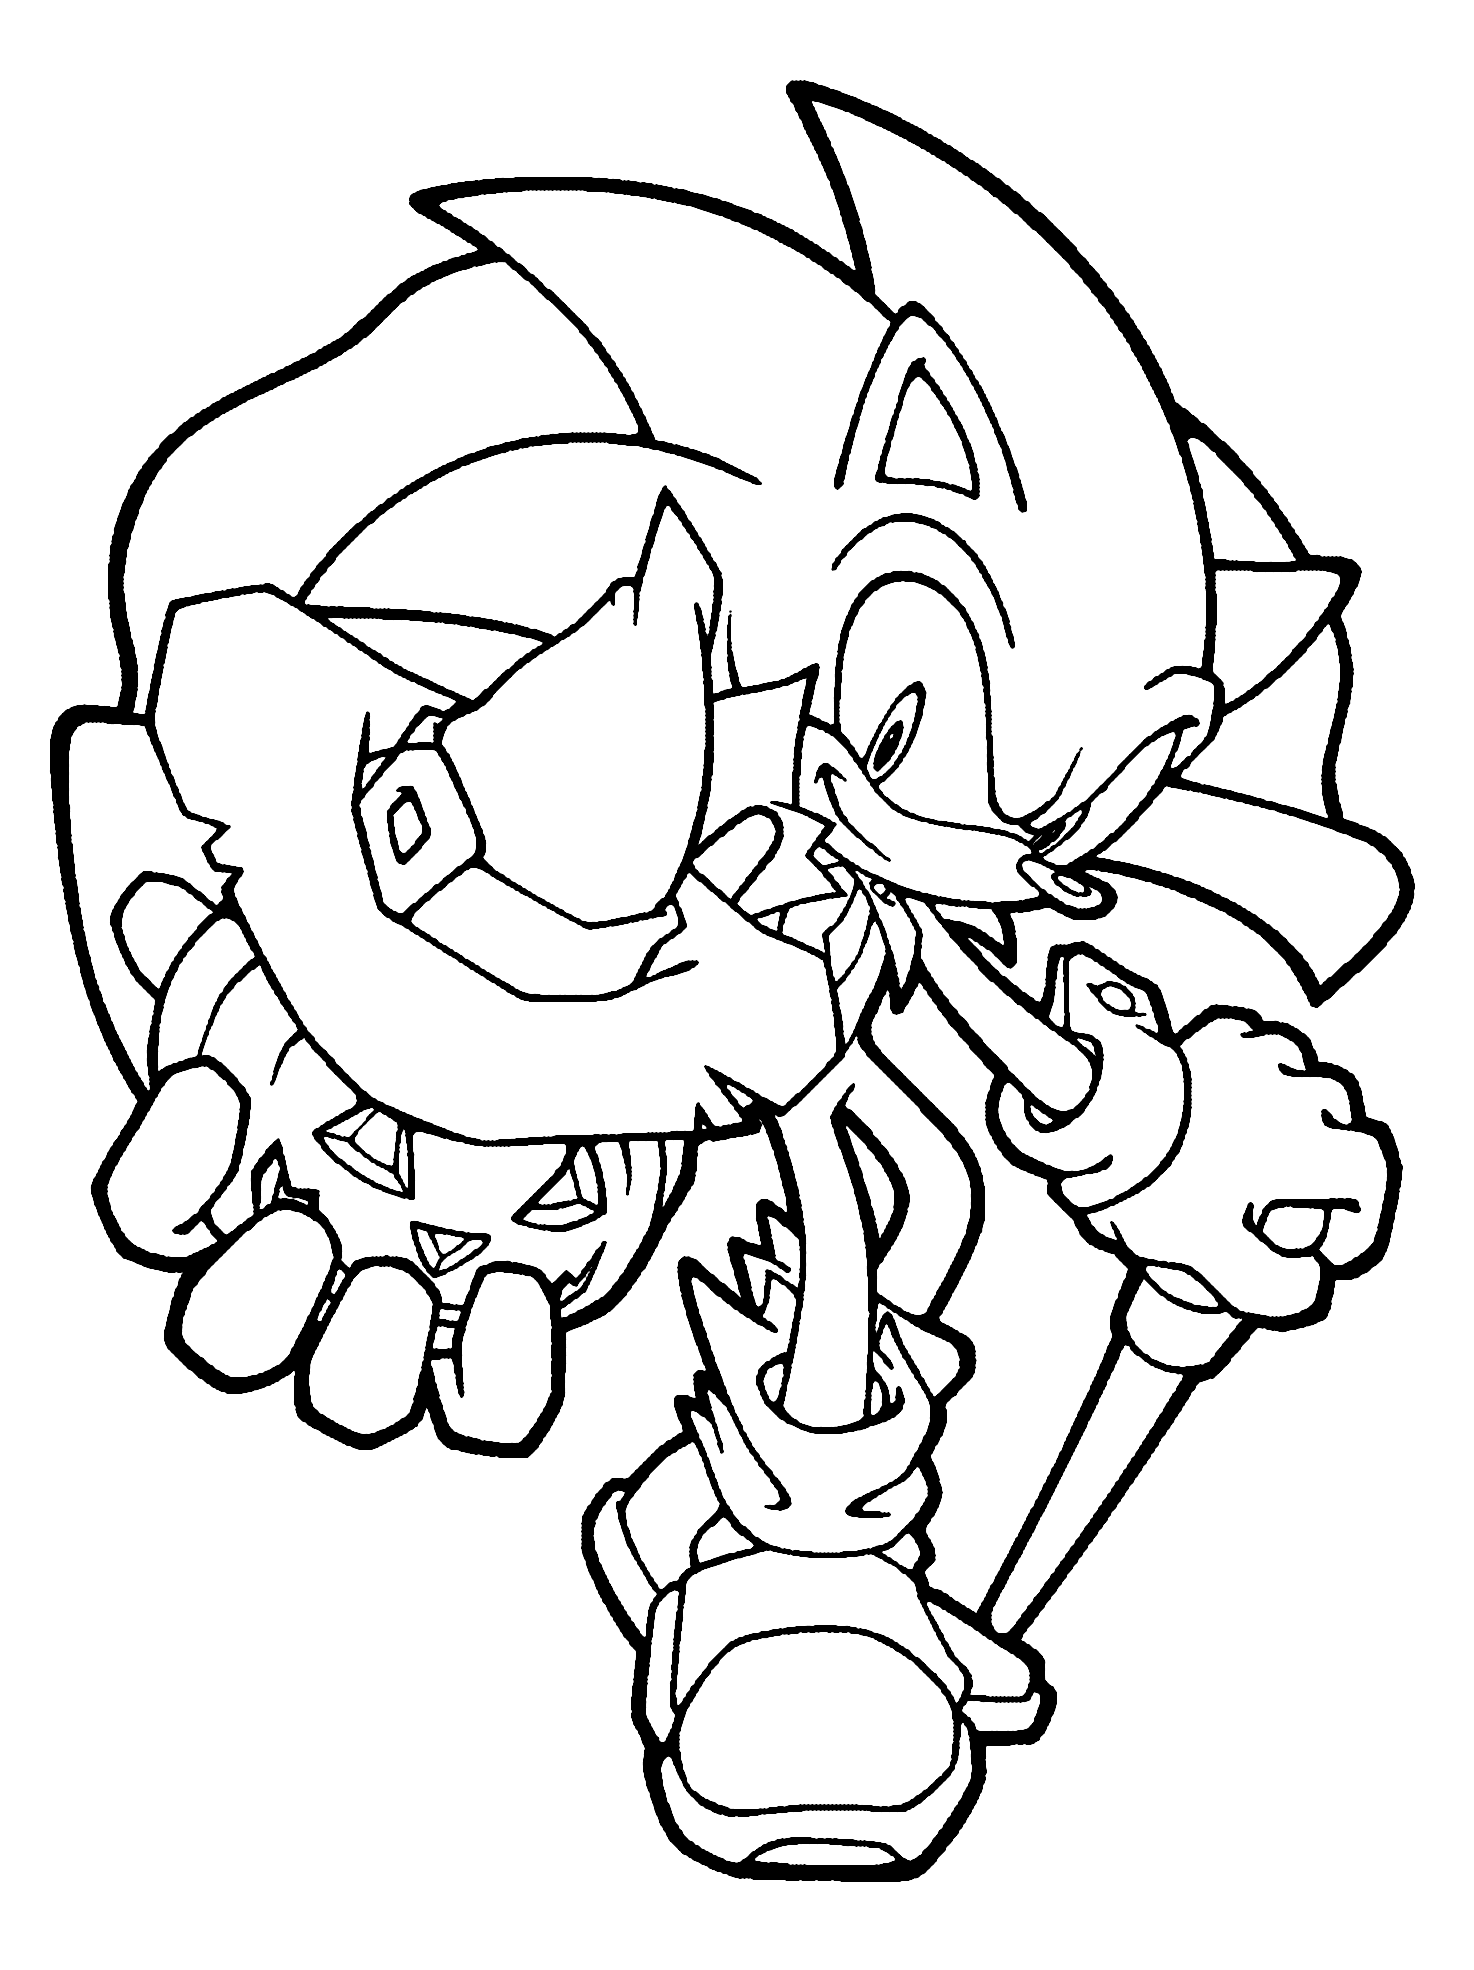 Coloring page - Halloween